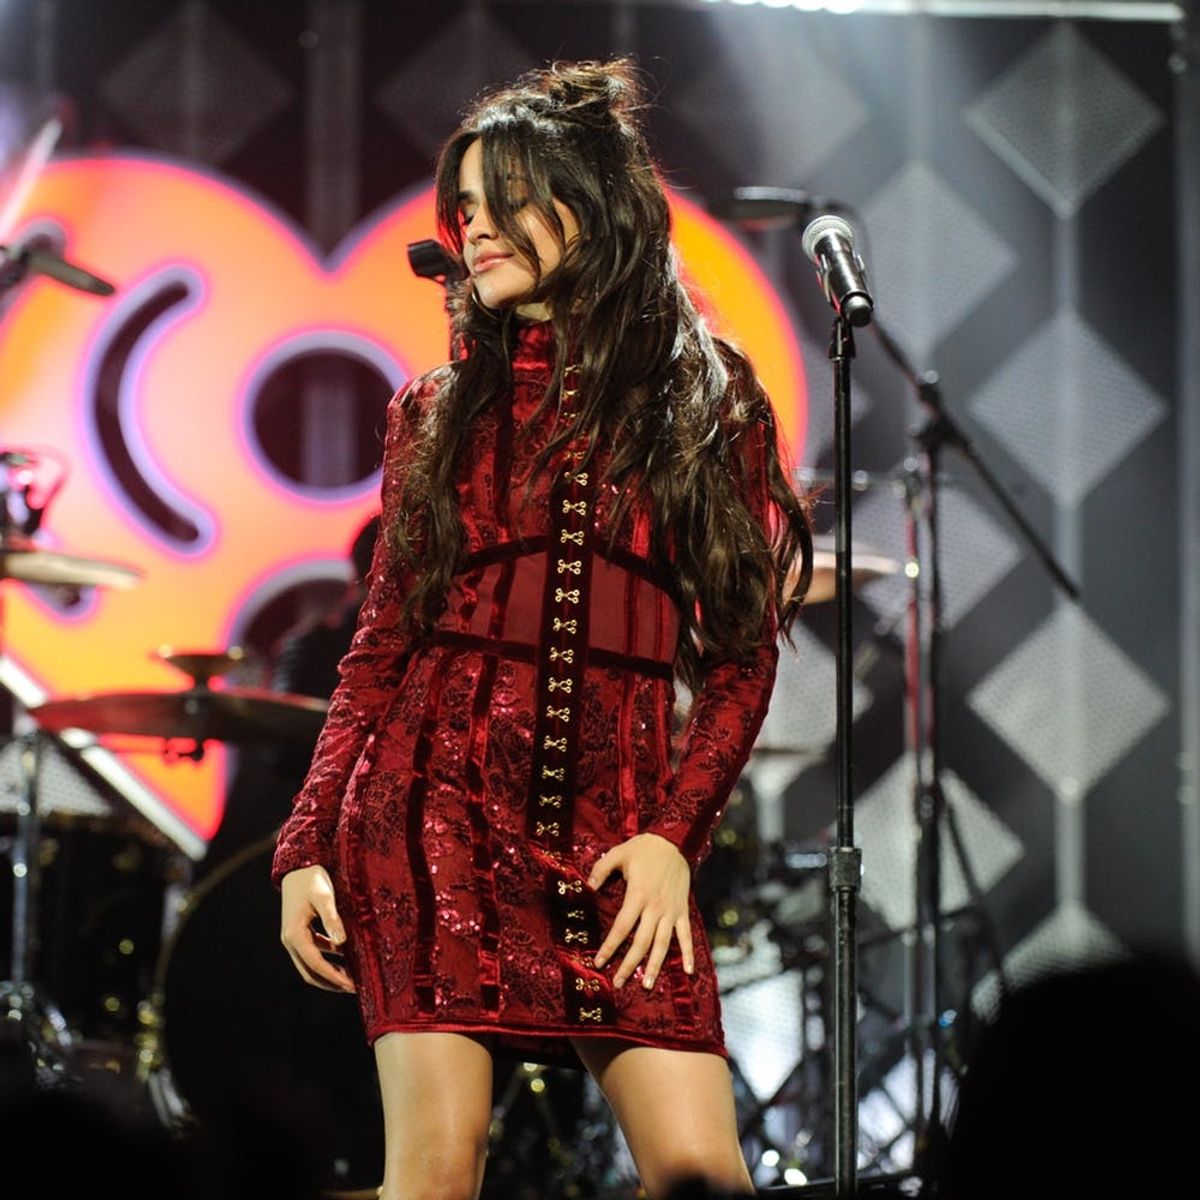 Why People Are Extra-Sad That Camila Cabello Left Fifth Harmony